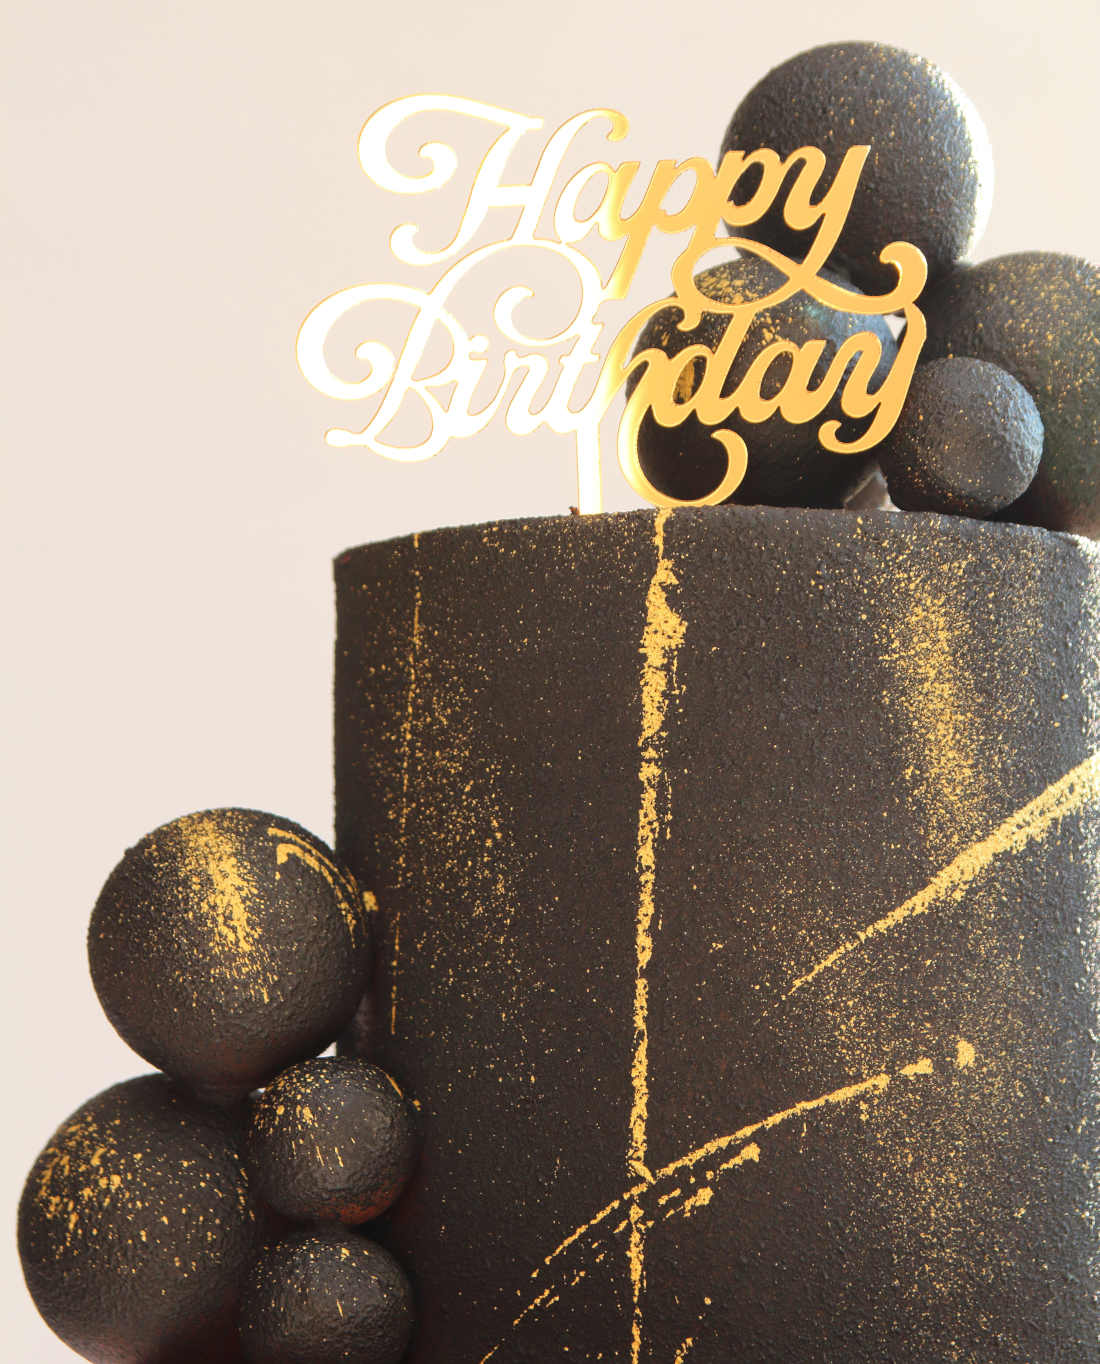 Gold decorations and spheres on a black birthday cake